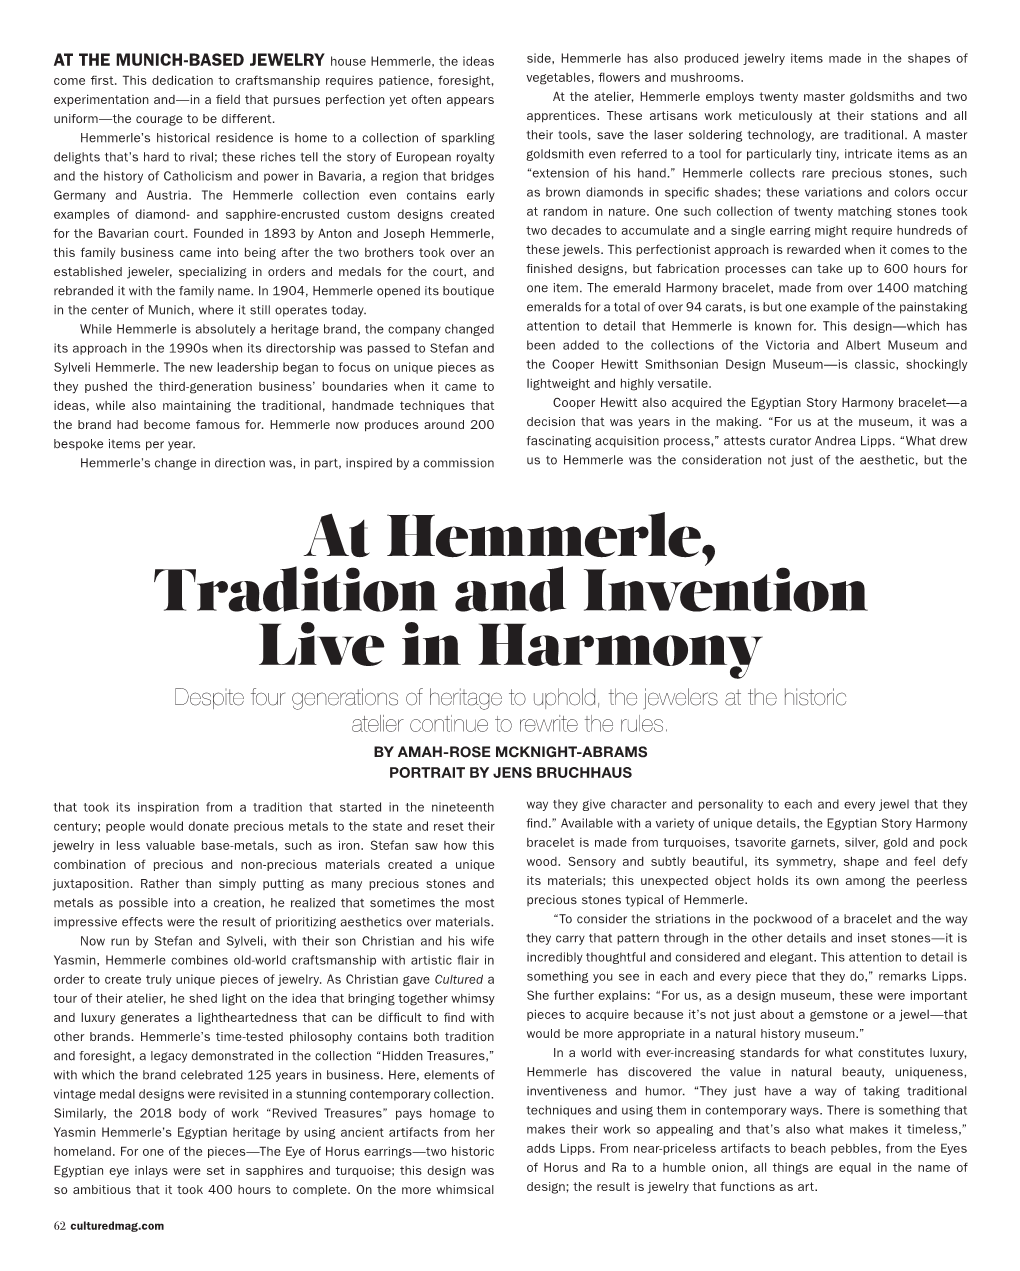 At Hemmerle, Tradition and Invention Live in Harmony